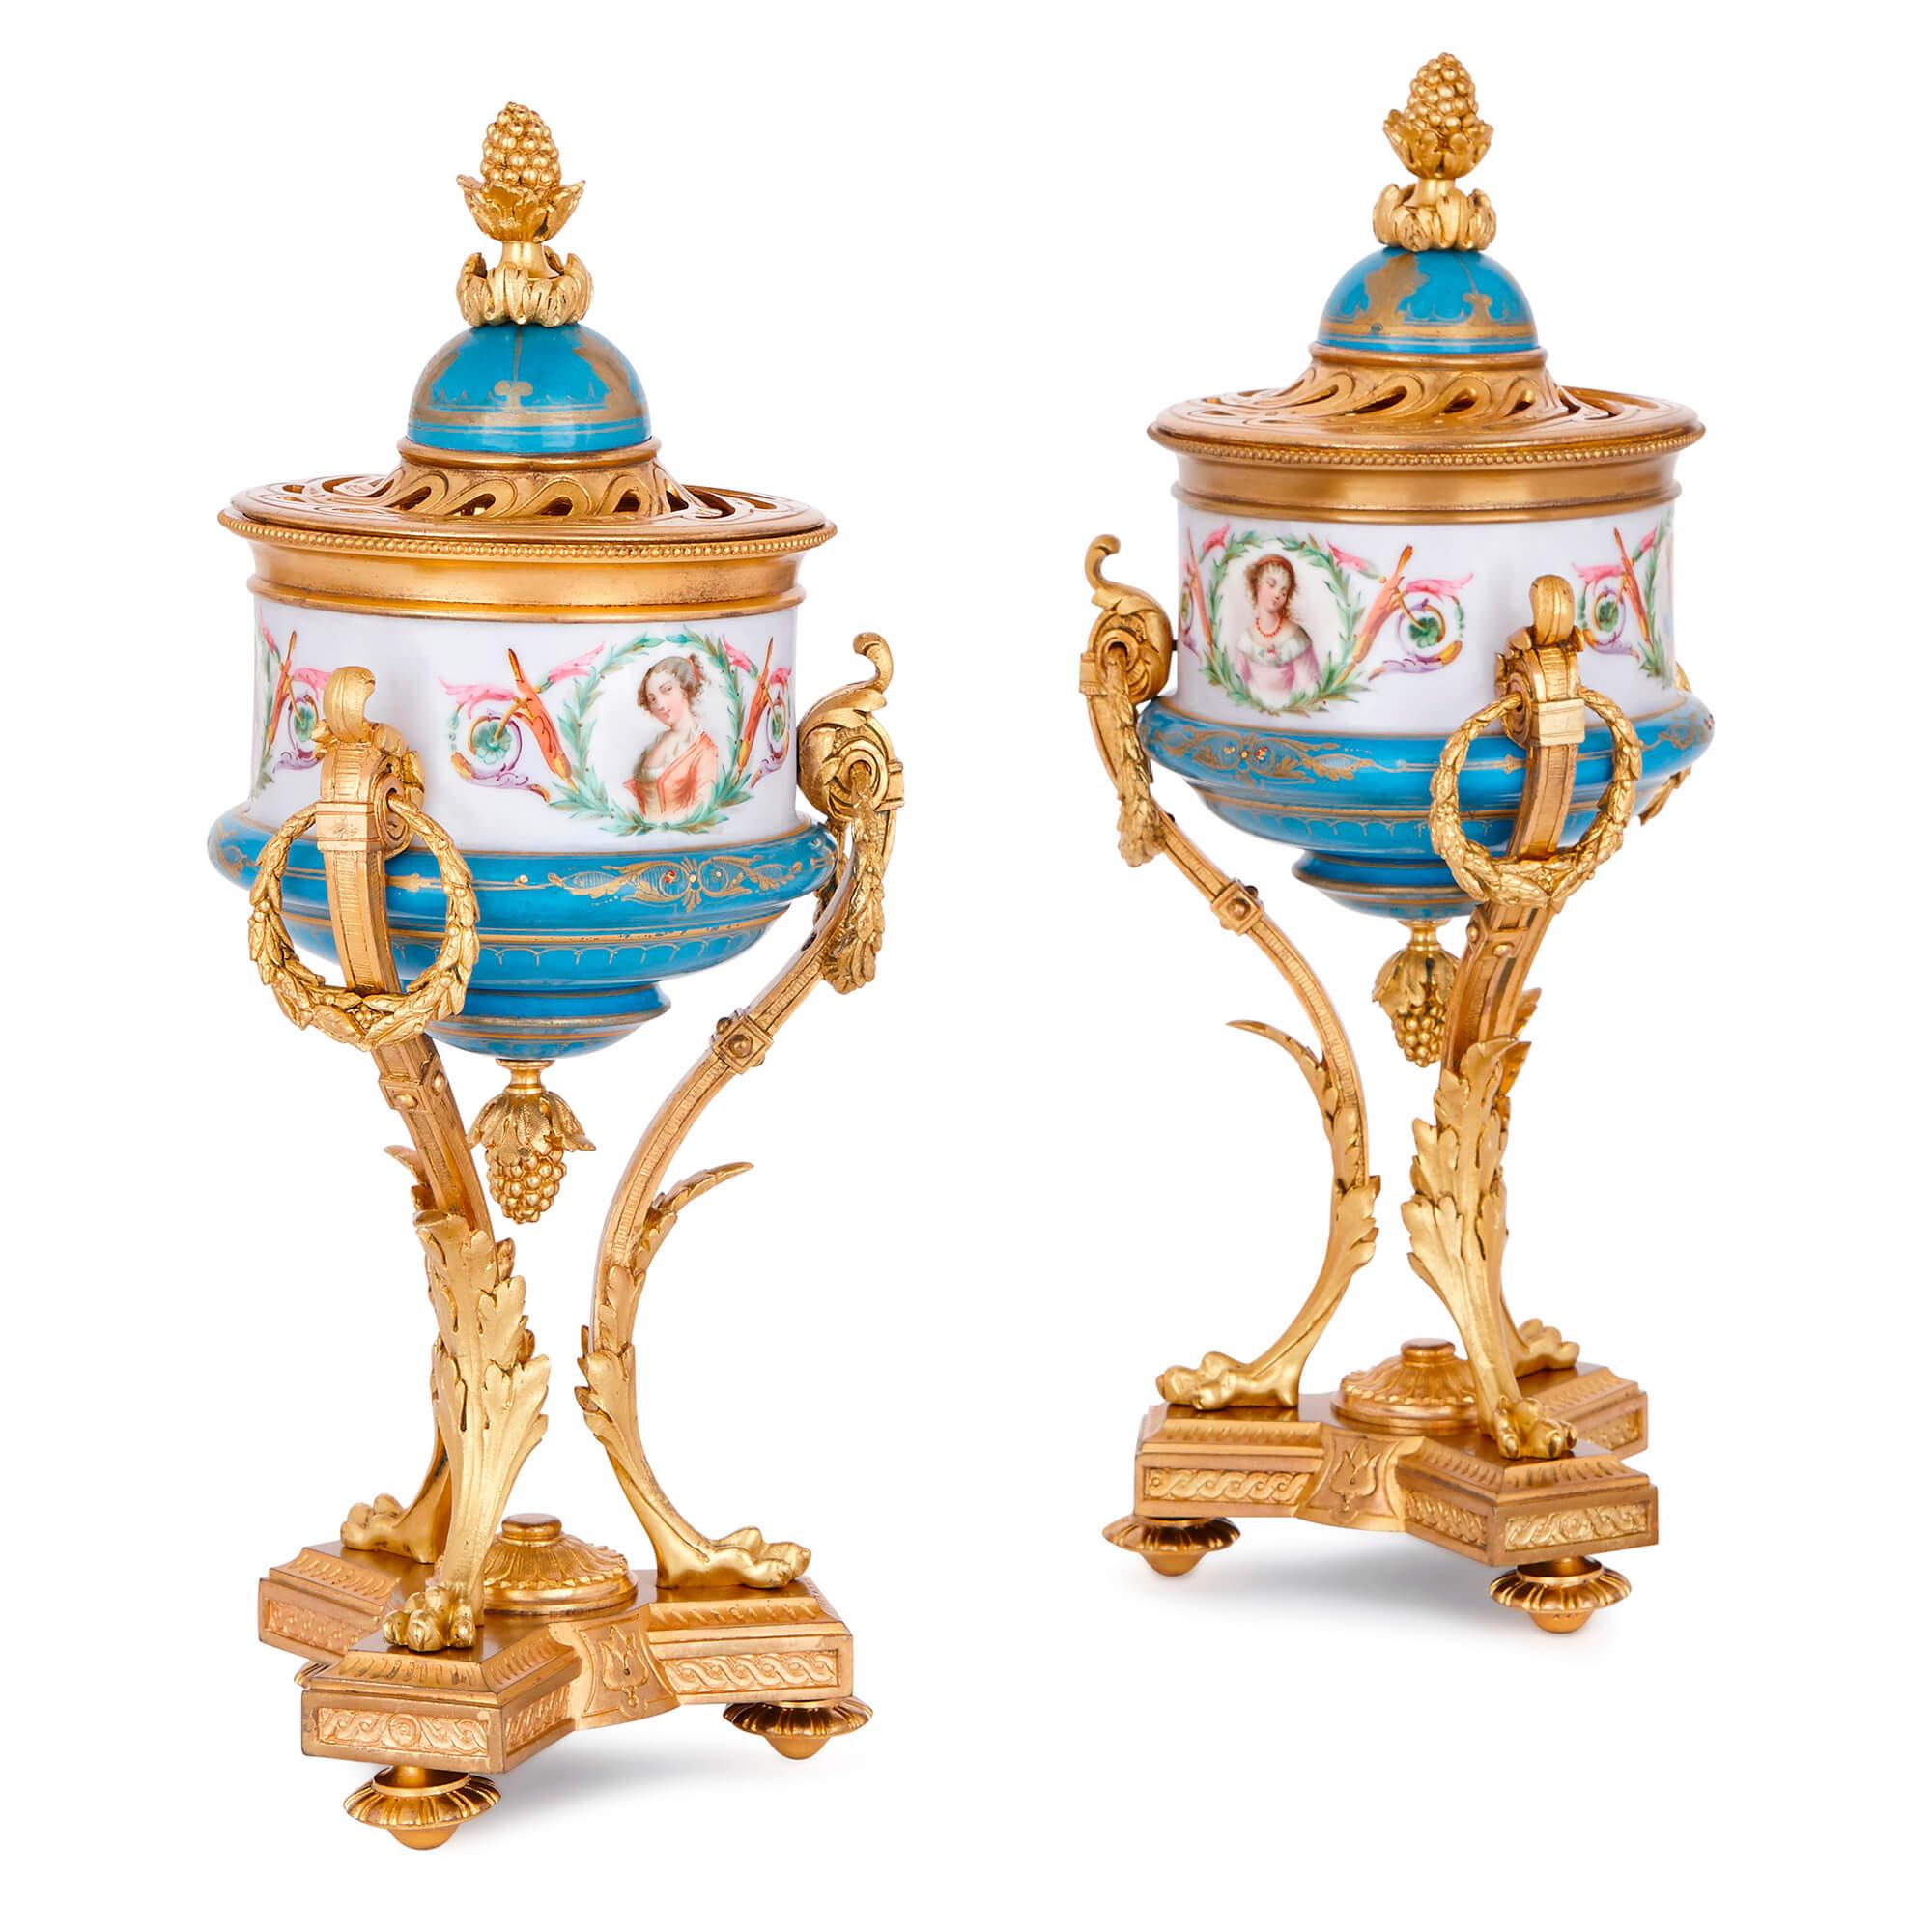 Crafted from fine porcelain in the Sèvre style and set into opulently-decorated gilt bronze frames, these unusual Belle Époque era vases will make delightful additions to an interior setting.

Each porcelain vase features expertly-painted busts of